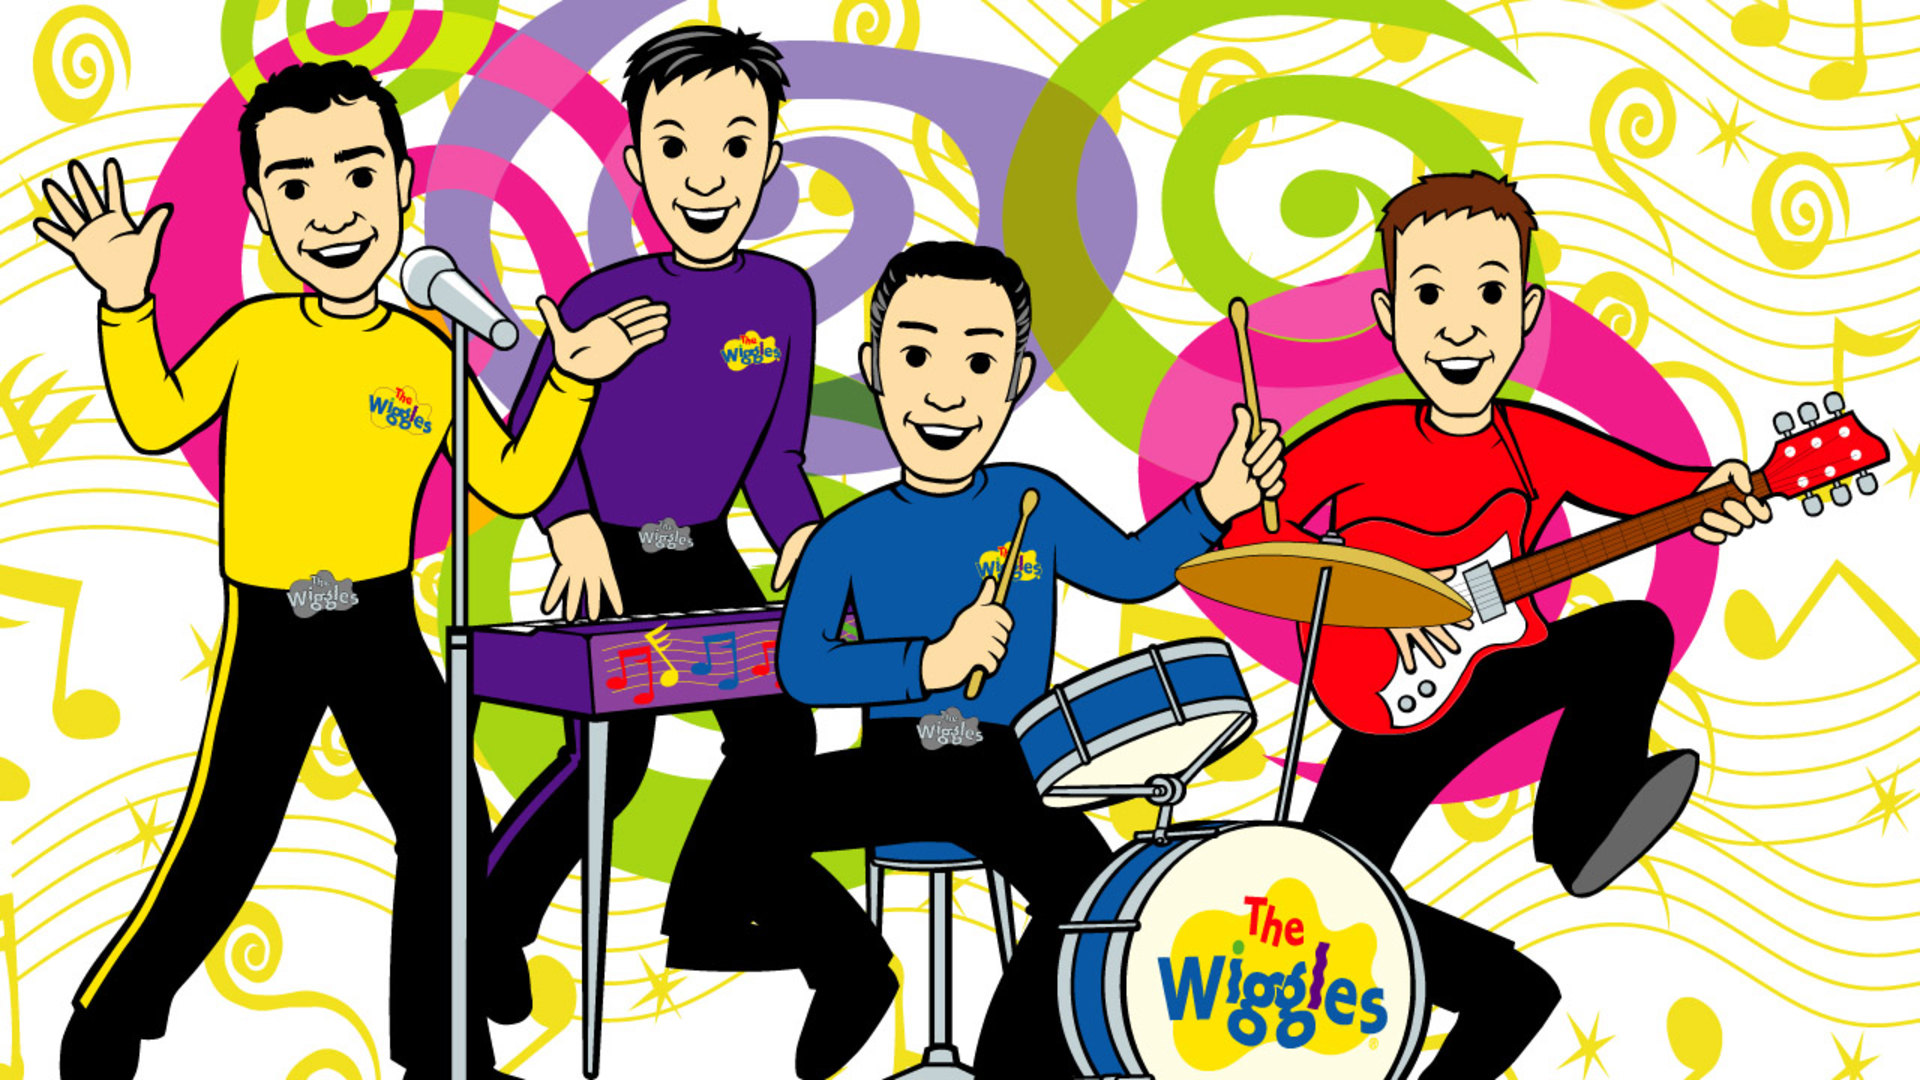 Hit Entertainment The Wiggles Wiggly Play Time